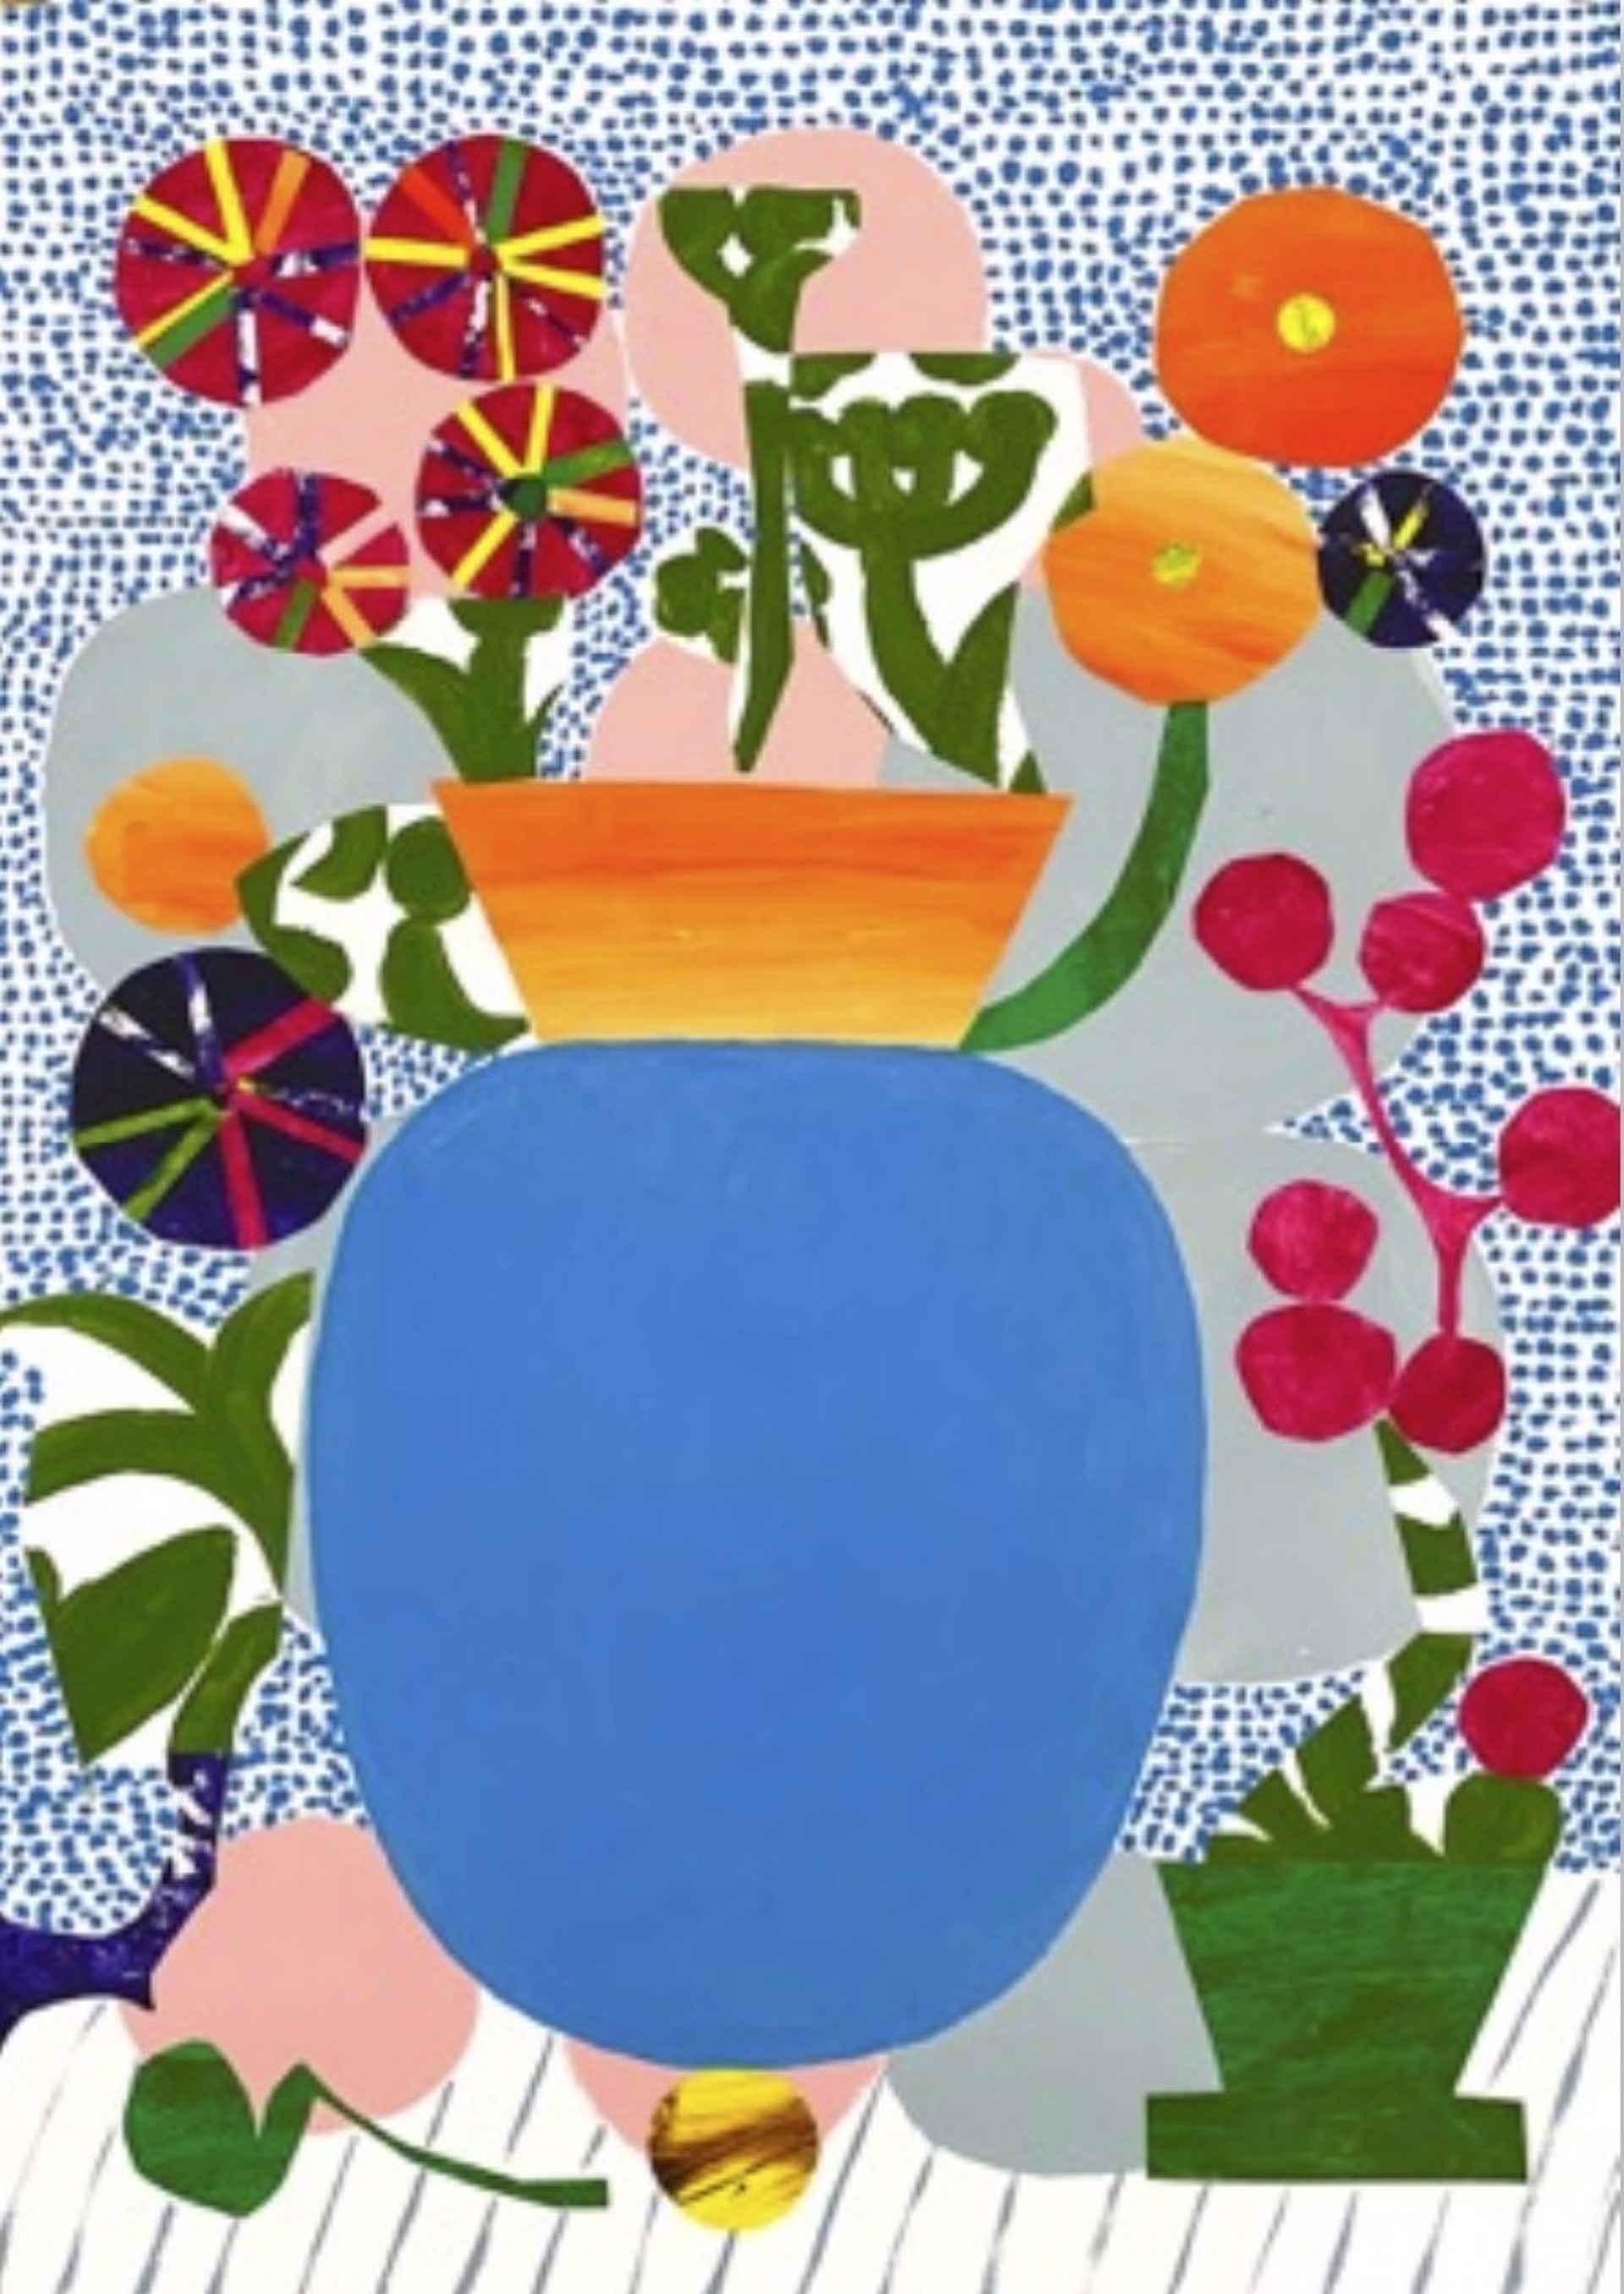 Vase and Flowers III by Maria Lundström